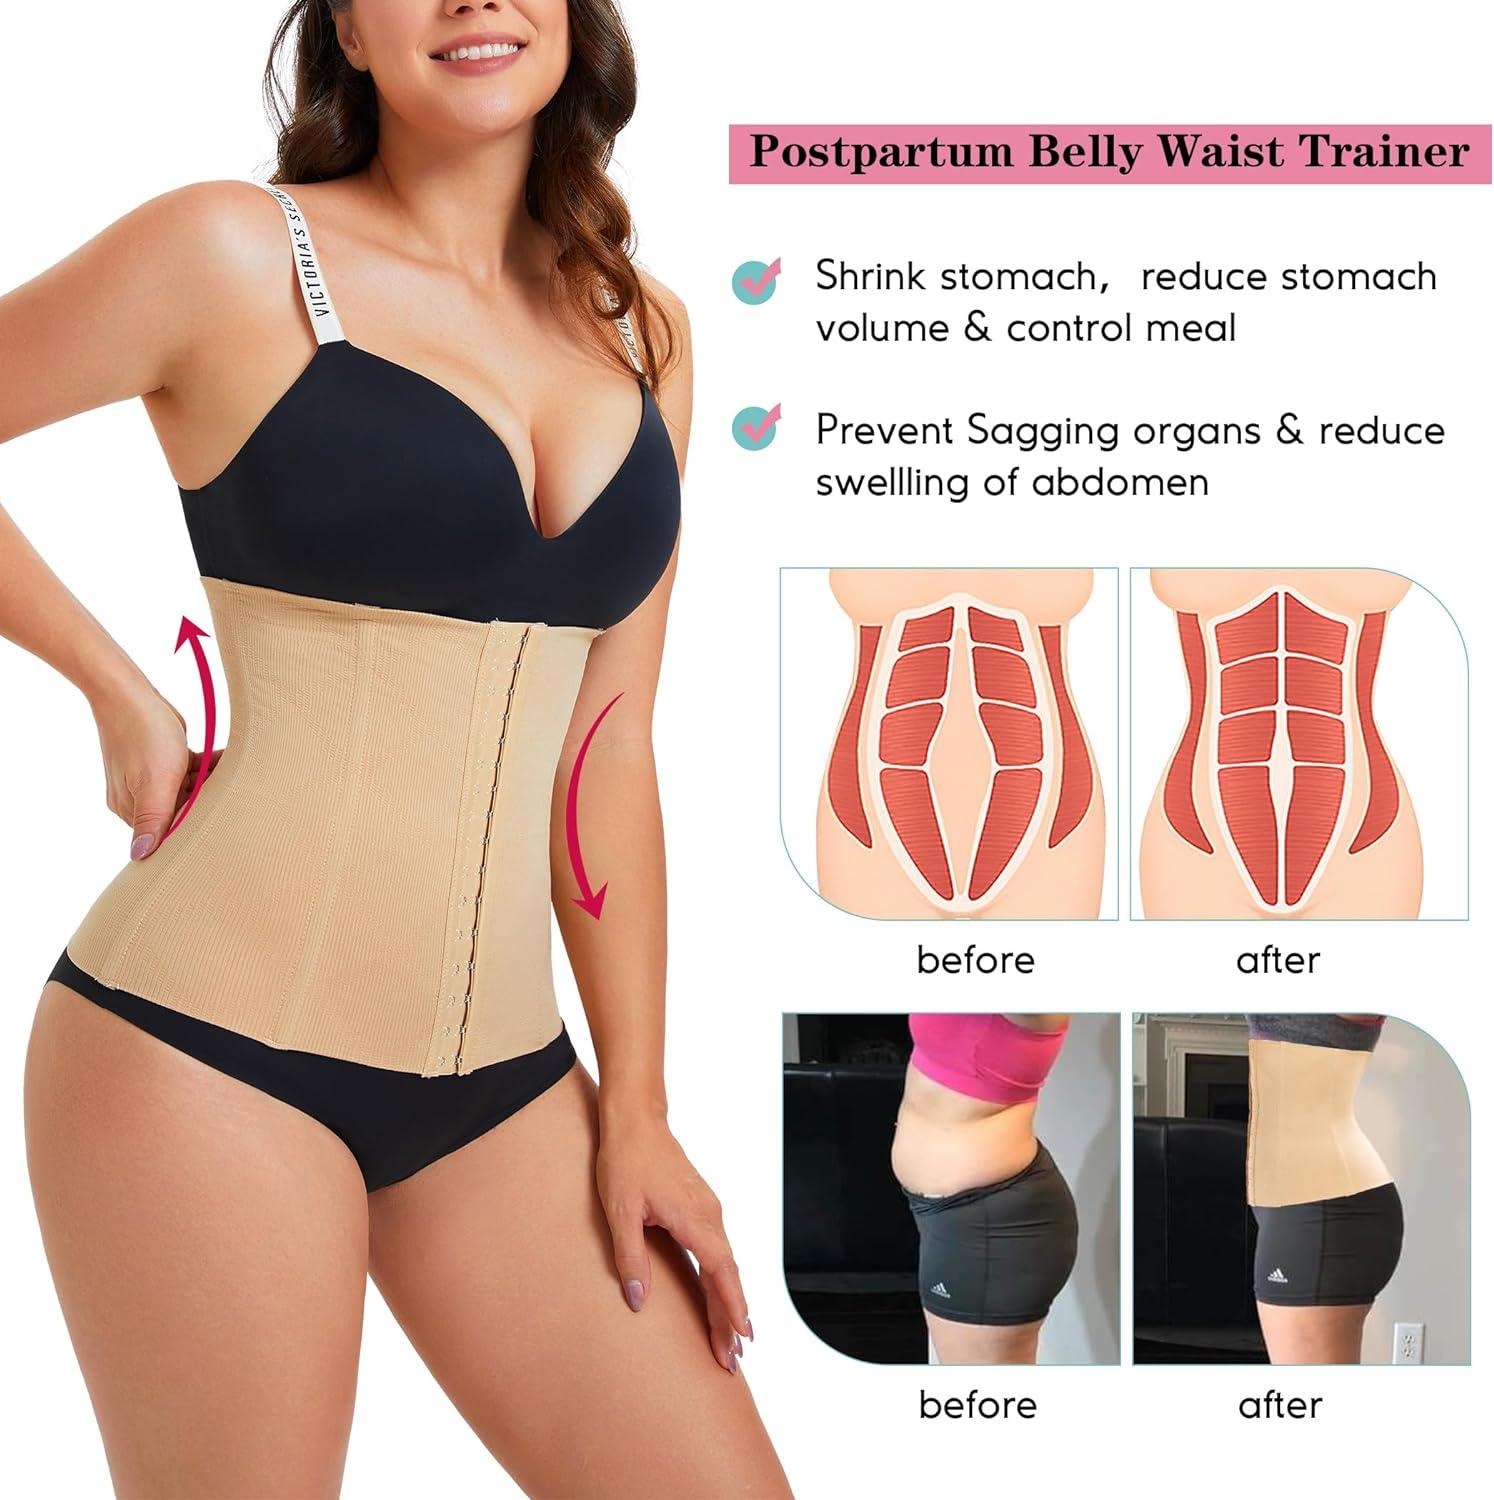 LODAY 2 in 1 Postpartum Recovery Belt Body Wraps Works for Tighten